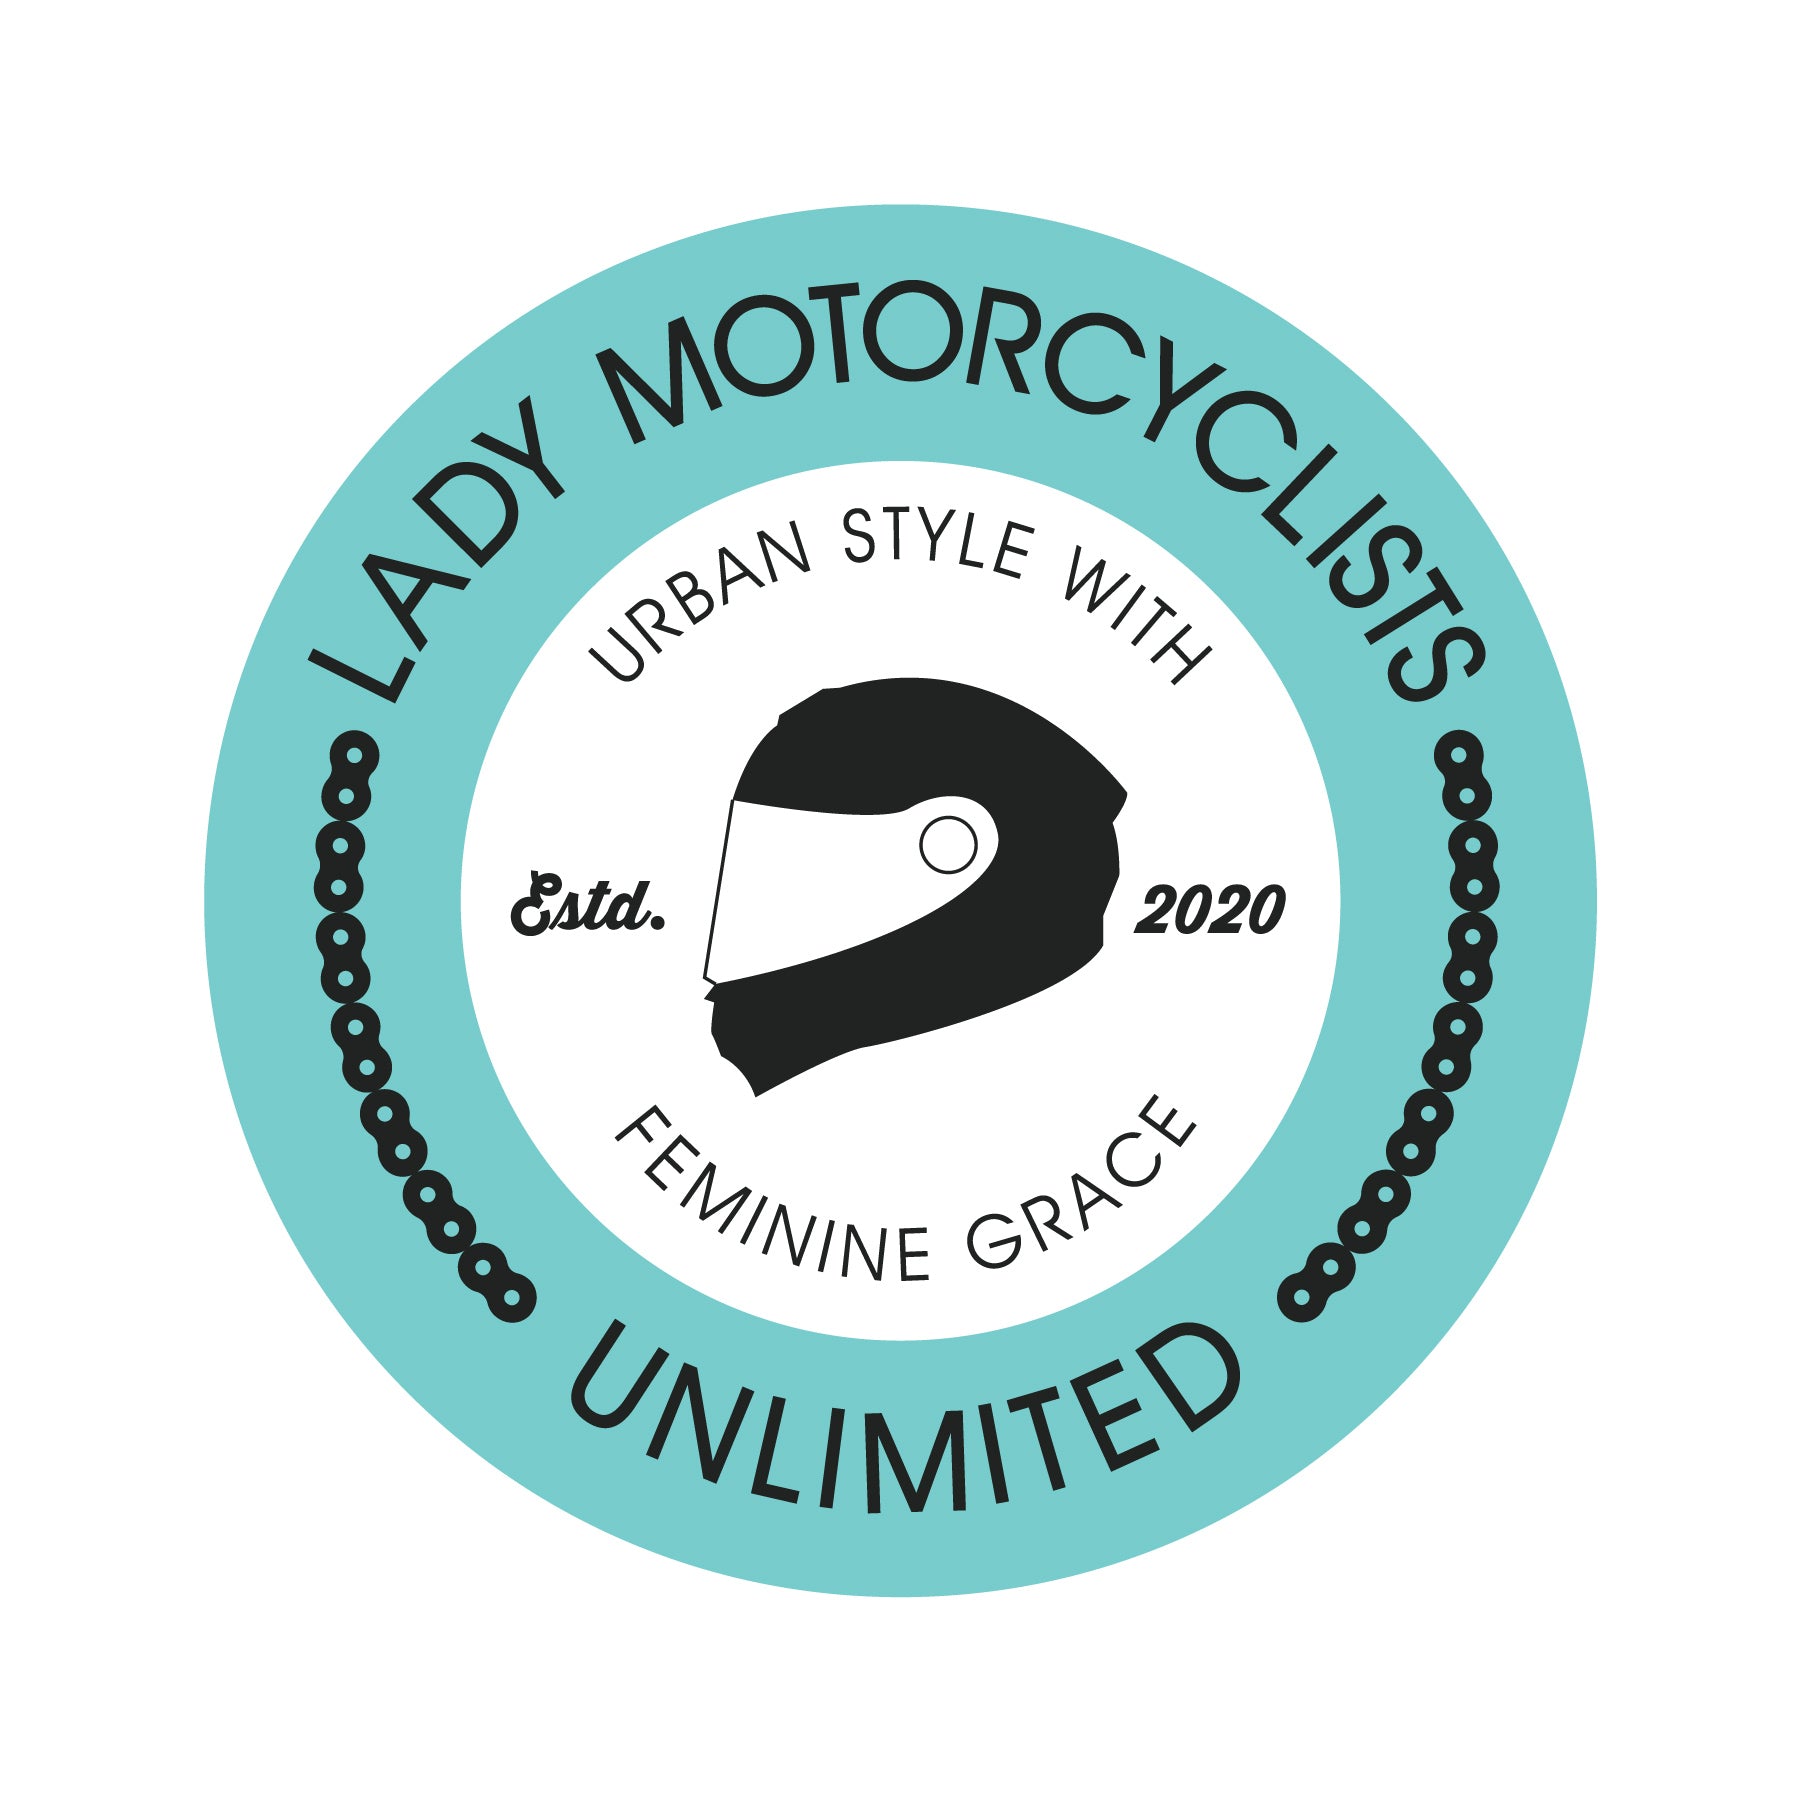 Lady Motorcyclists Unlimited